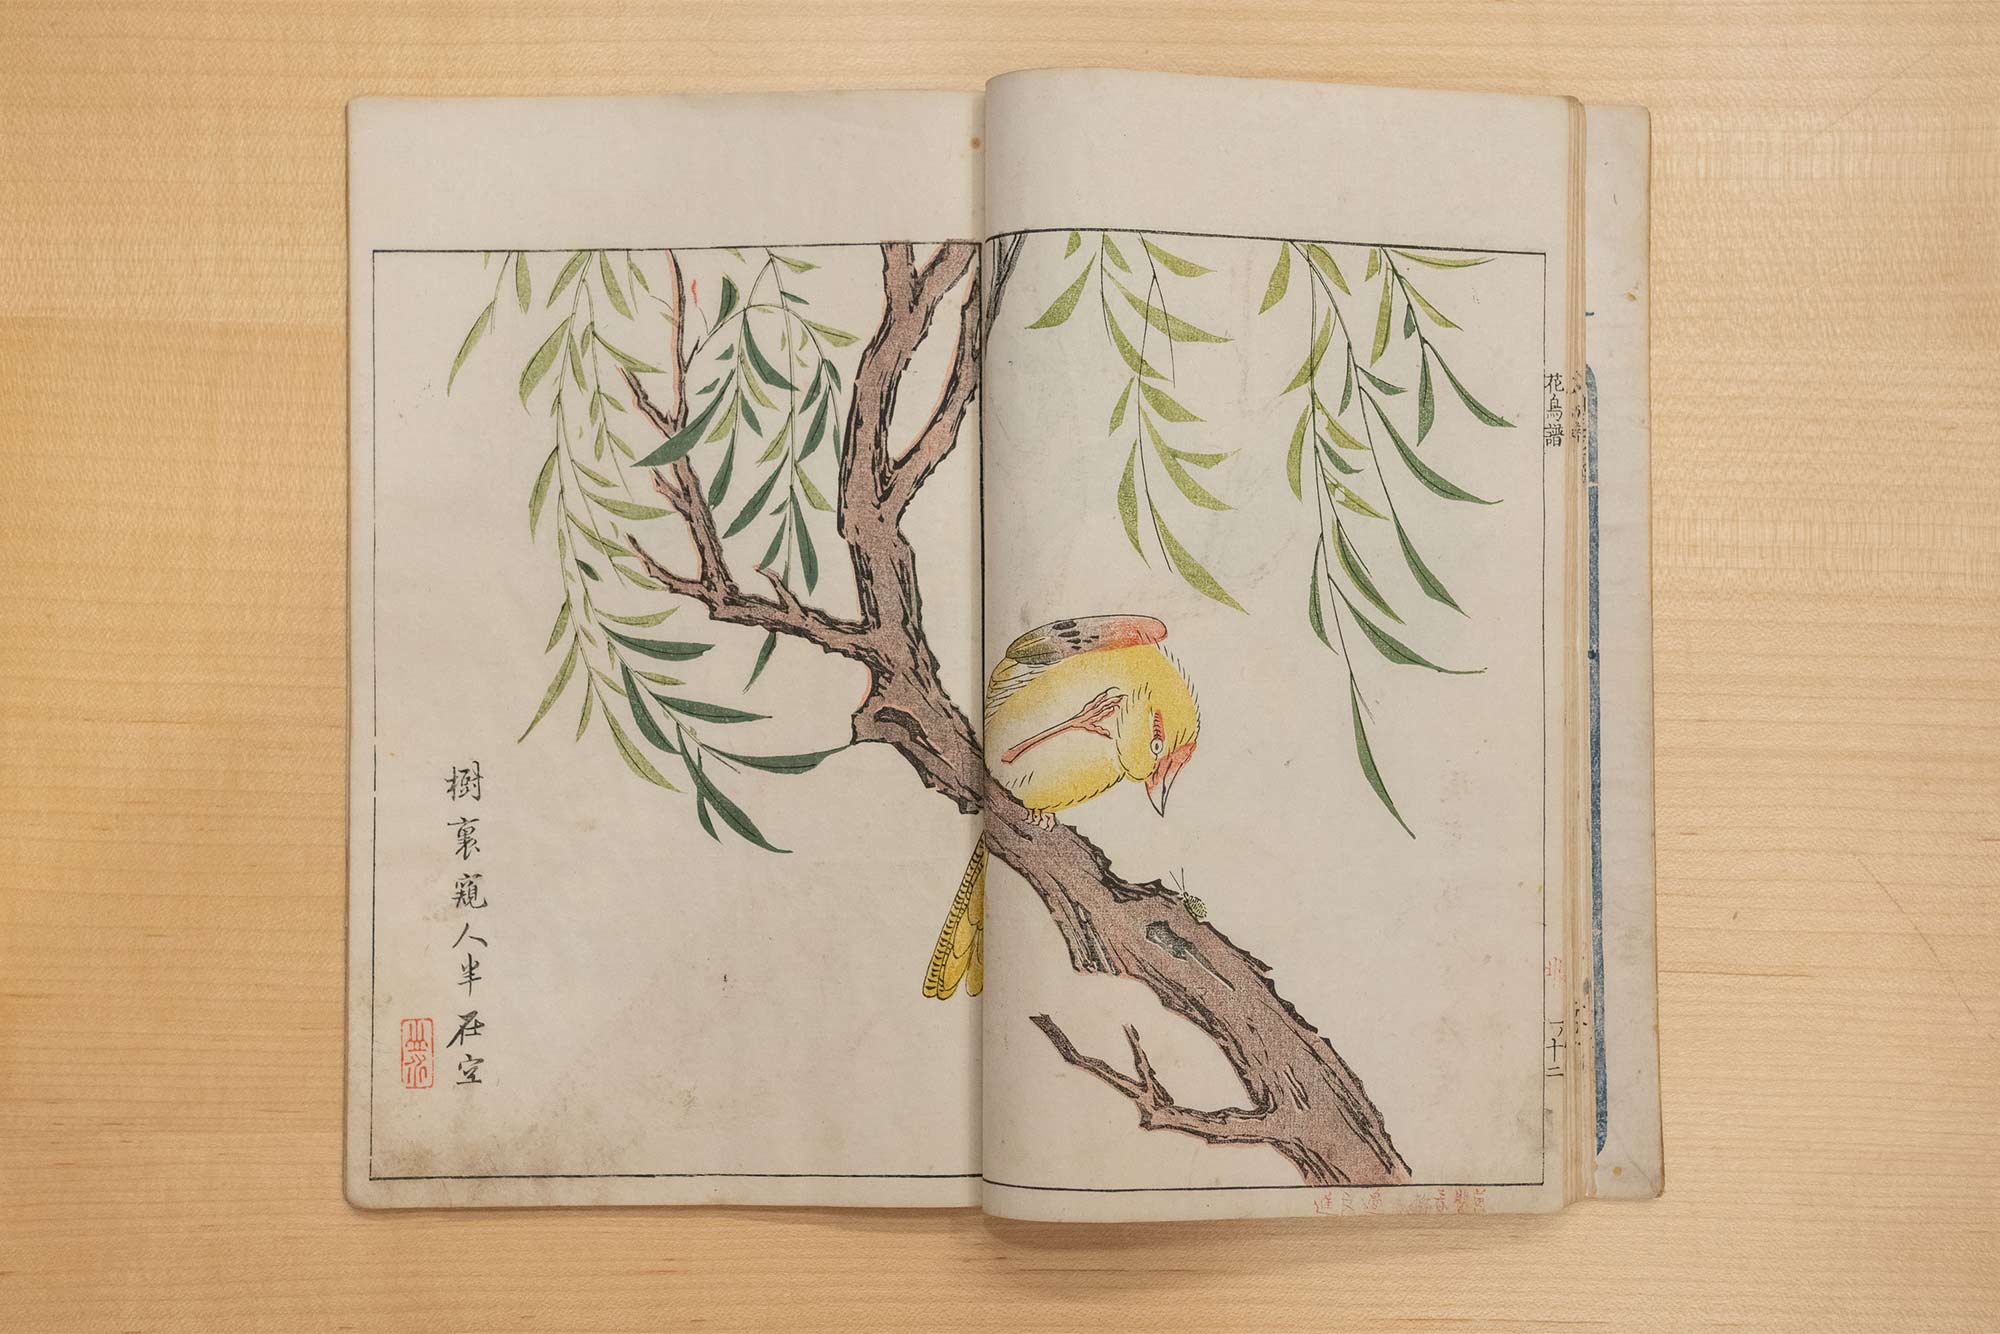 Overhead of an illustration of a yellow bird in a tree from 1748.